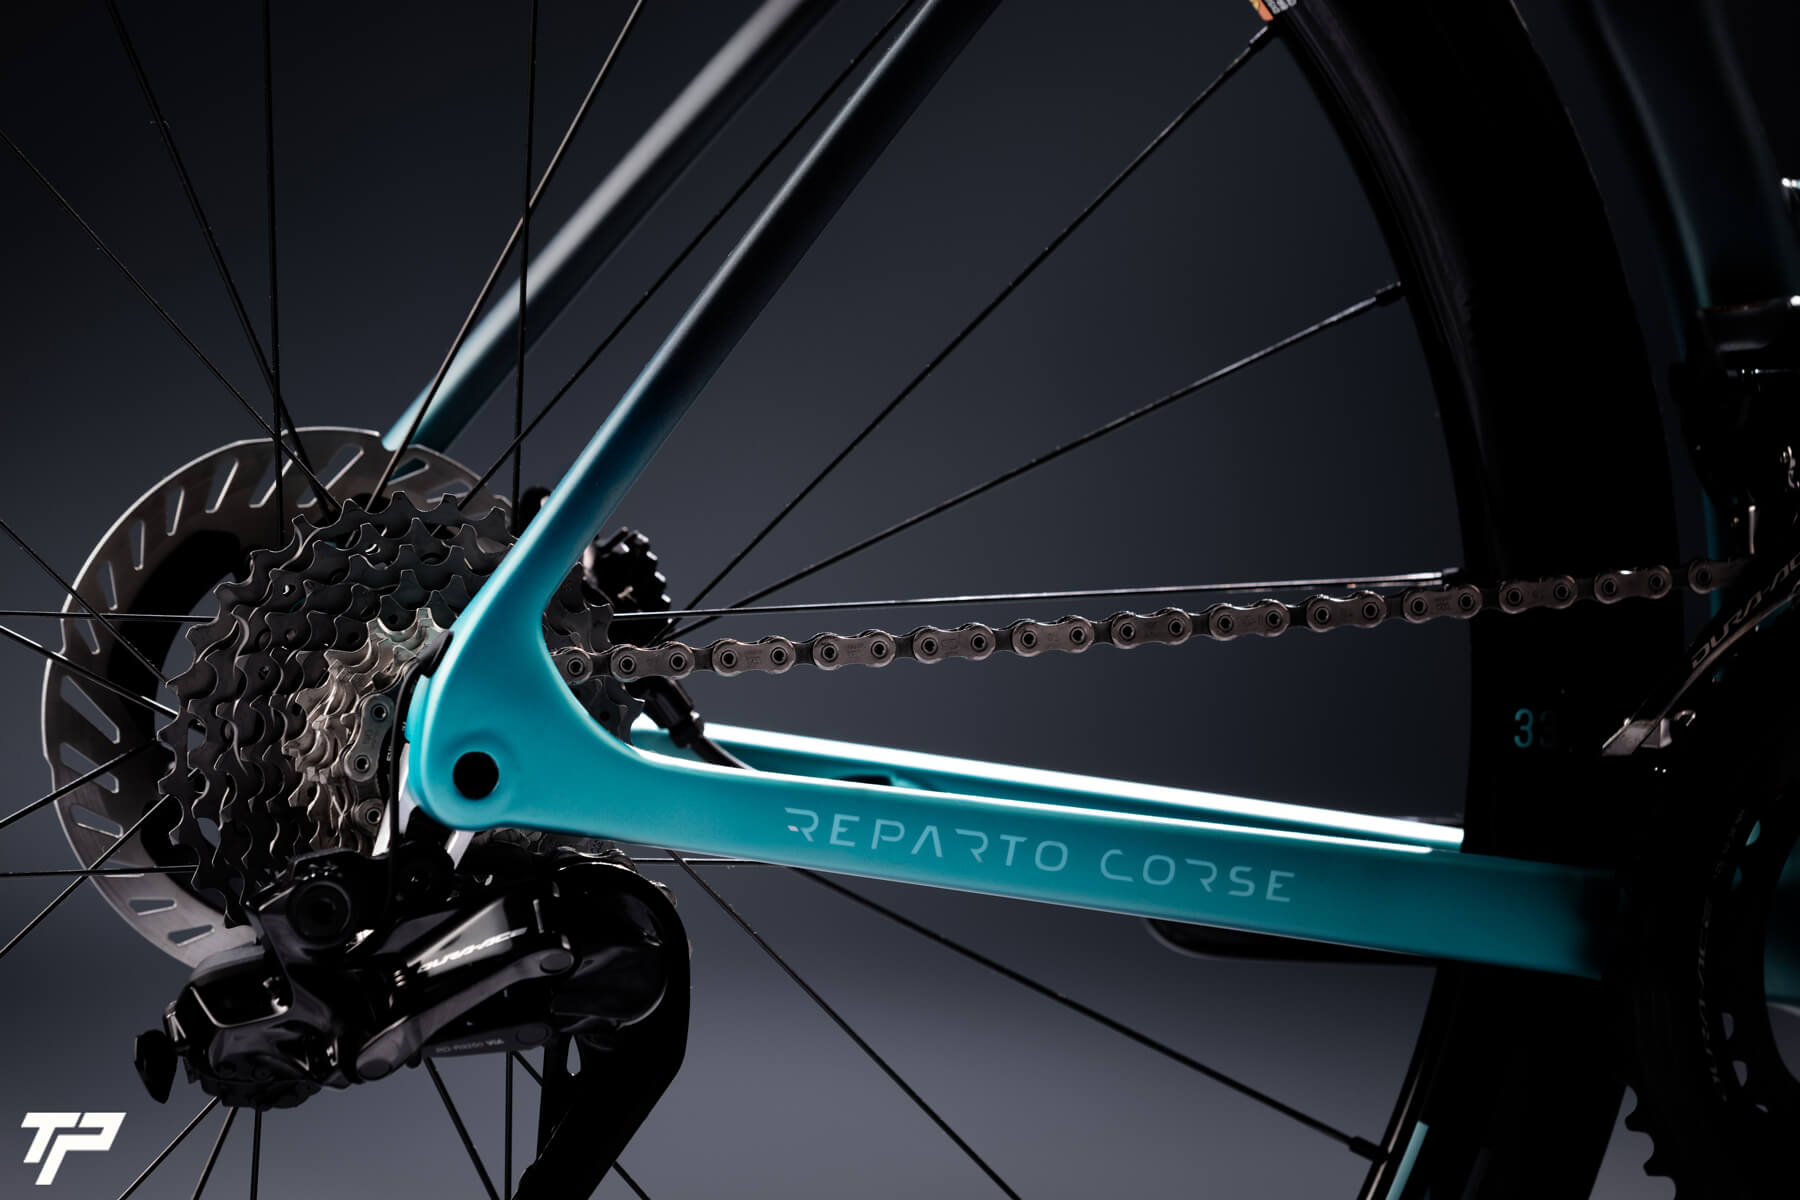 Bianchi Specialissima RC: lightness and extraordinary performance